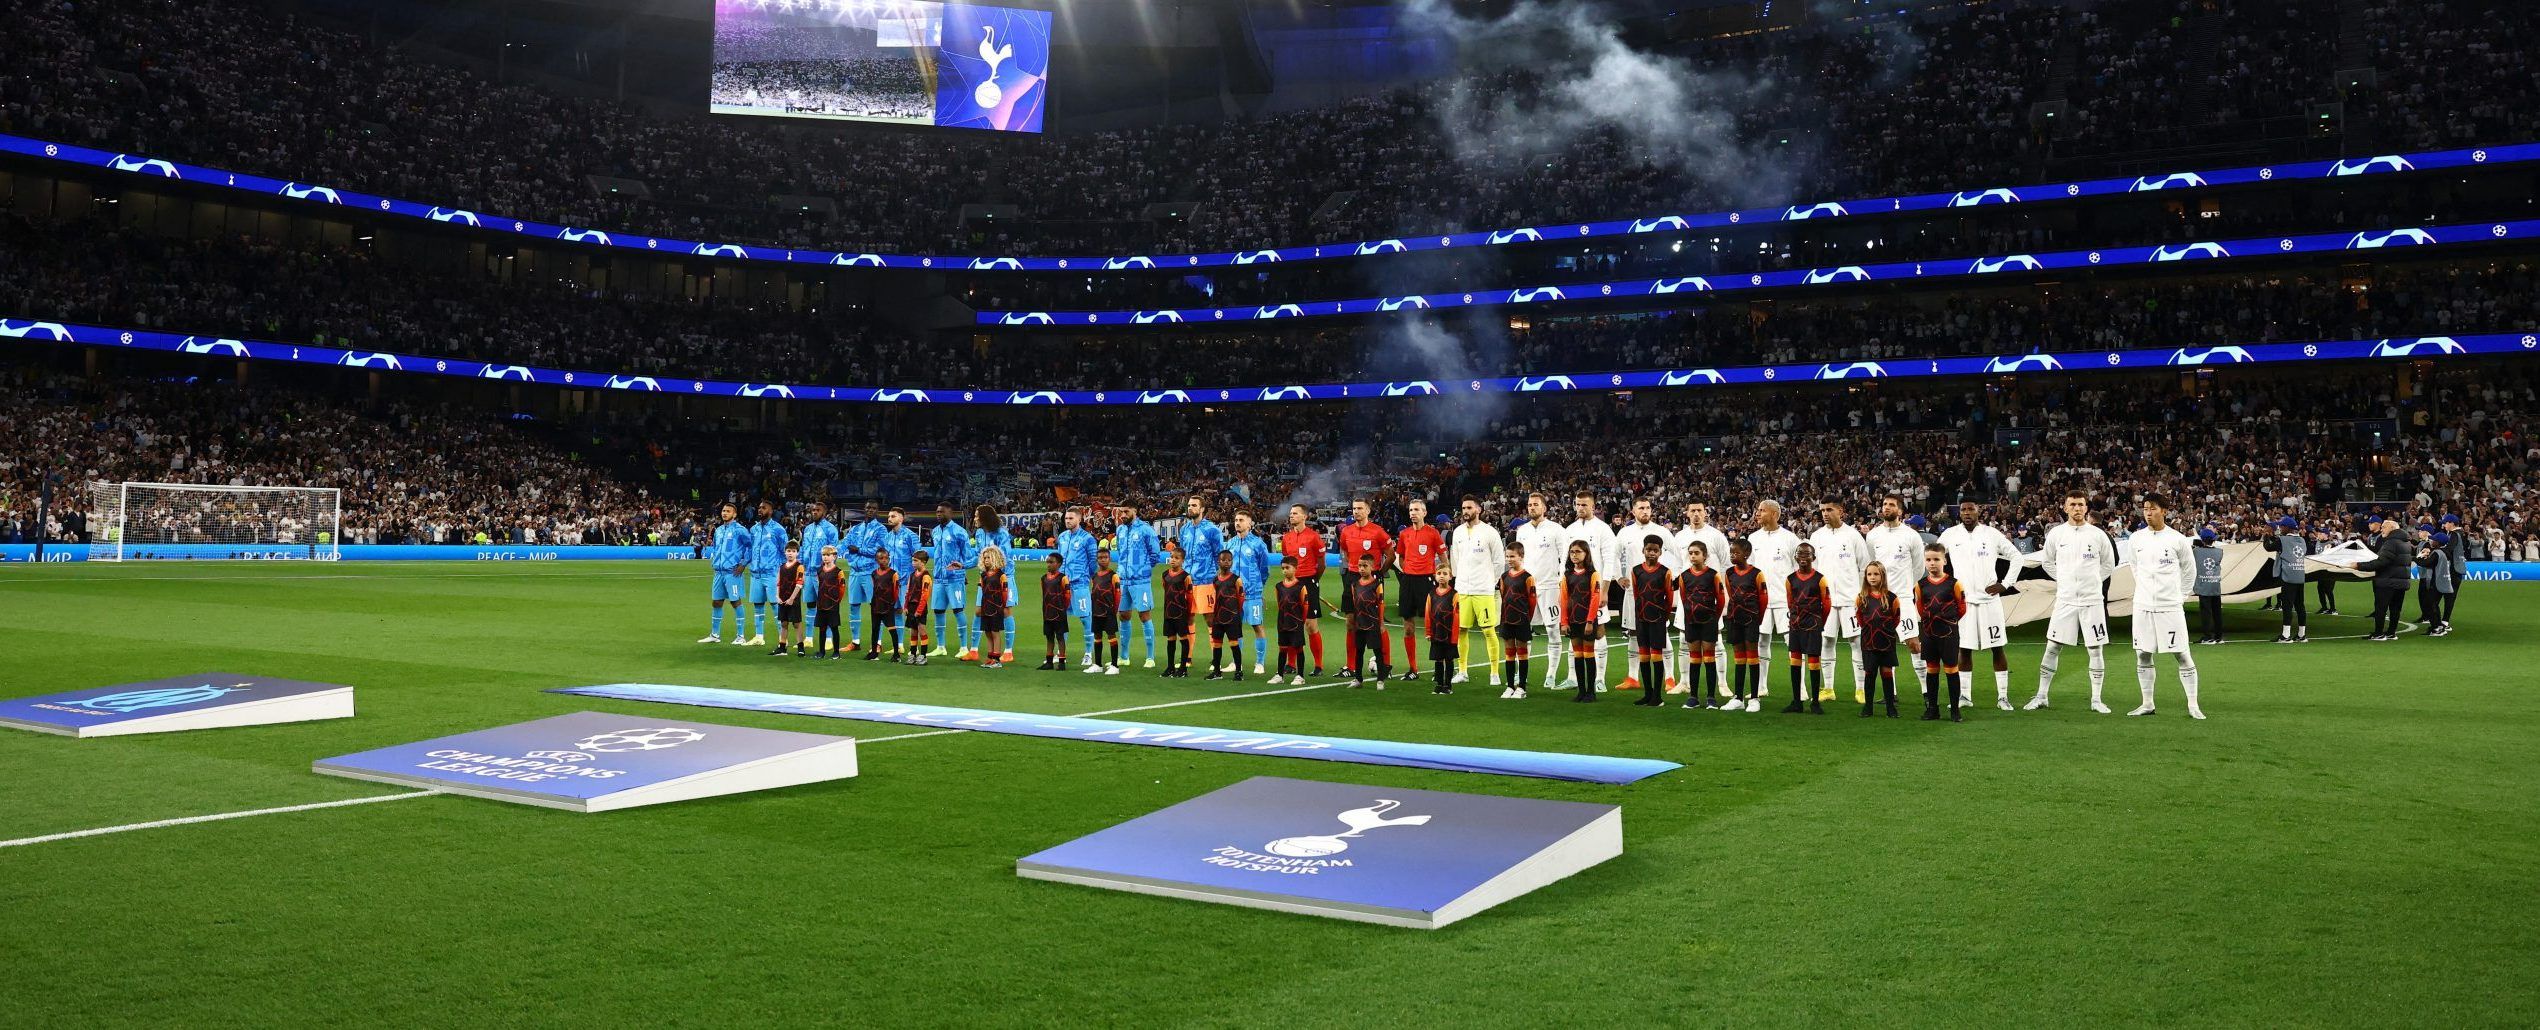 Tottenham Hotspur Stadium general view as players from both teams line up before the match